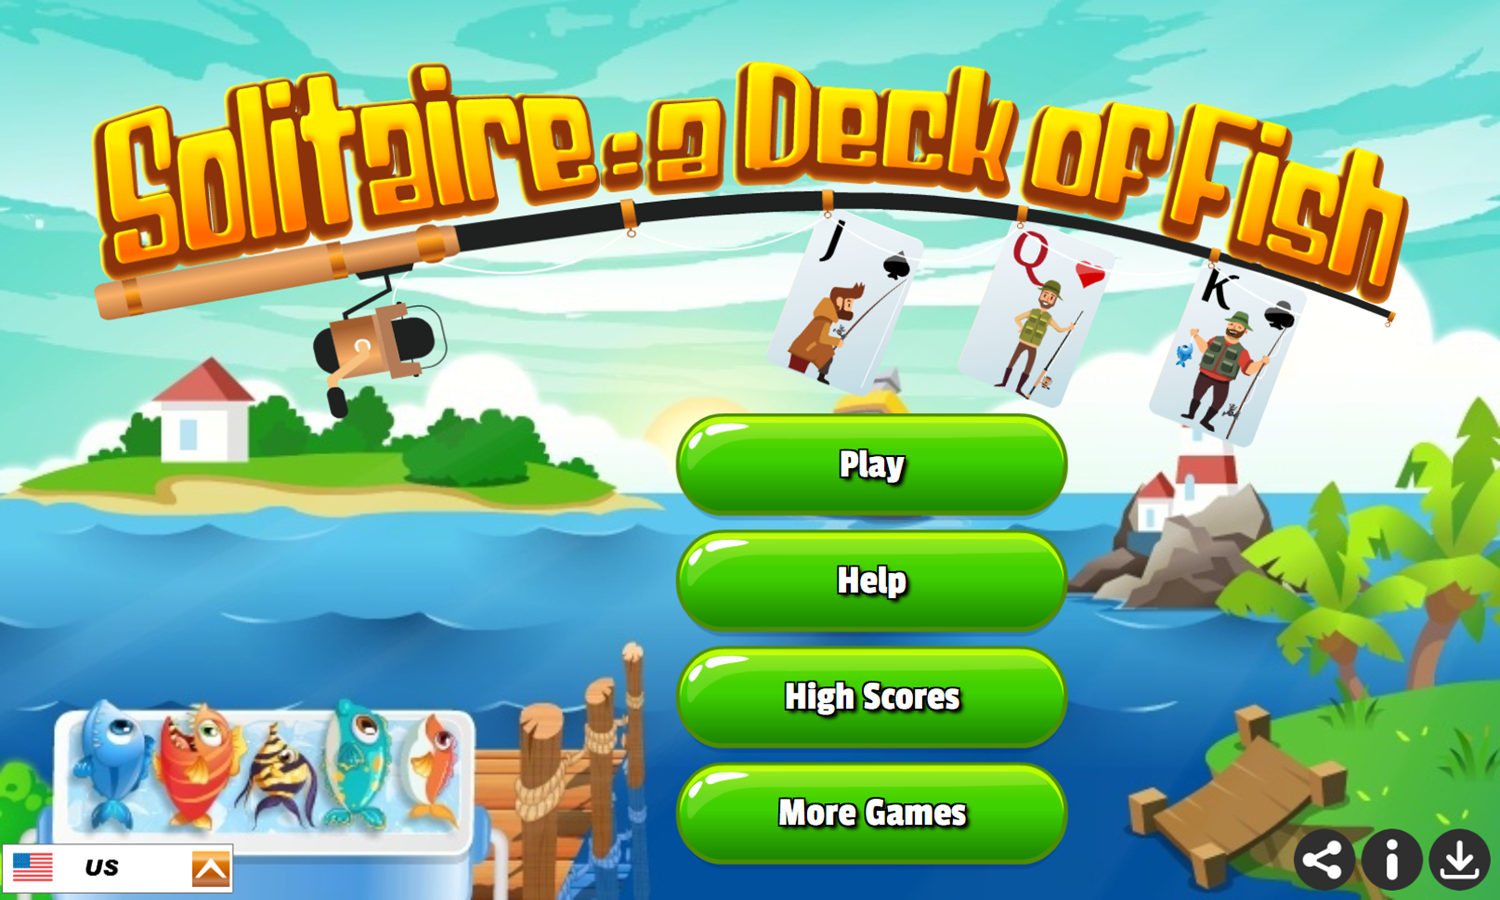 Solitaire A Deck of Fish Game Welcome Screen Screenshot.